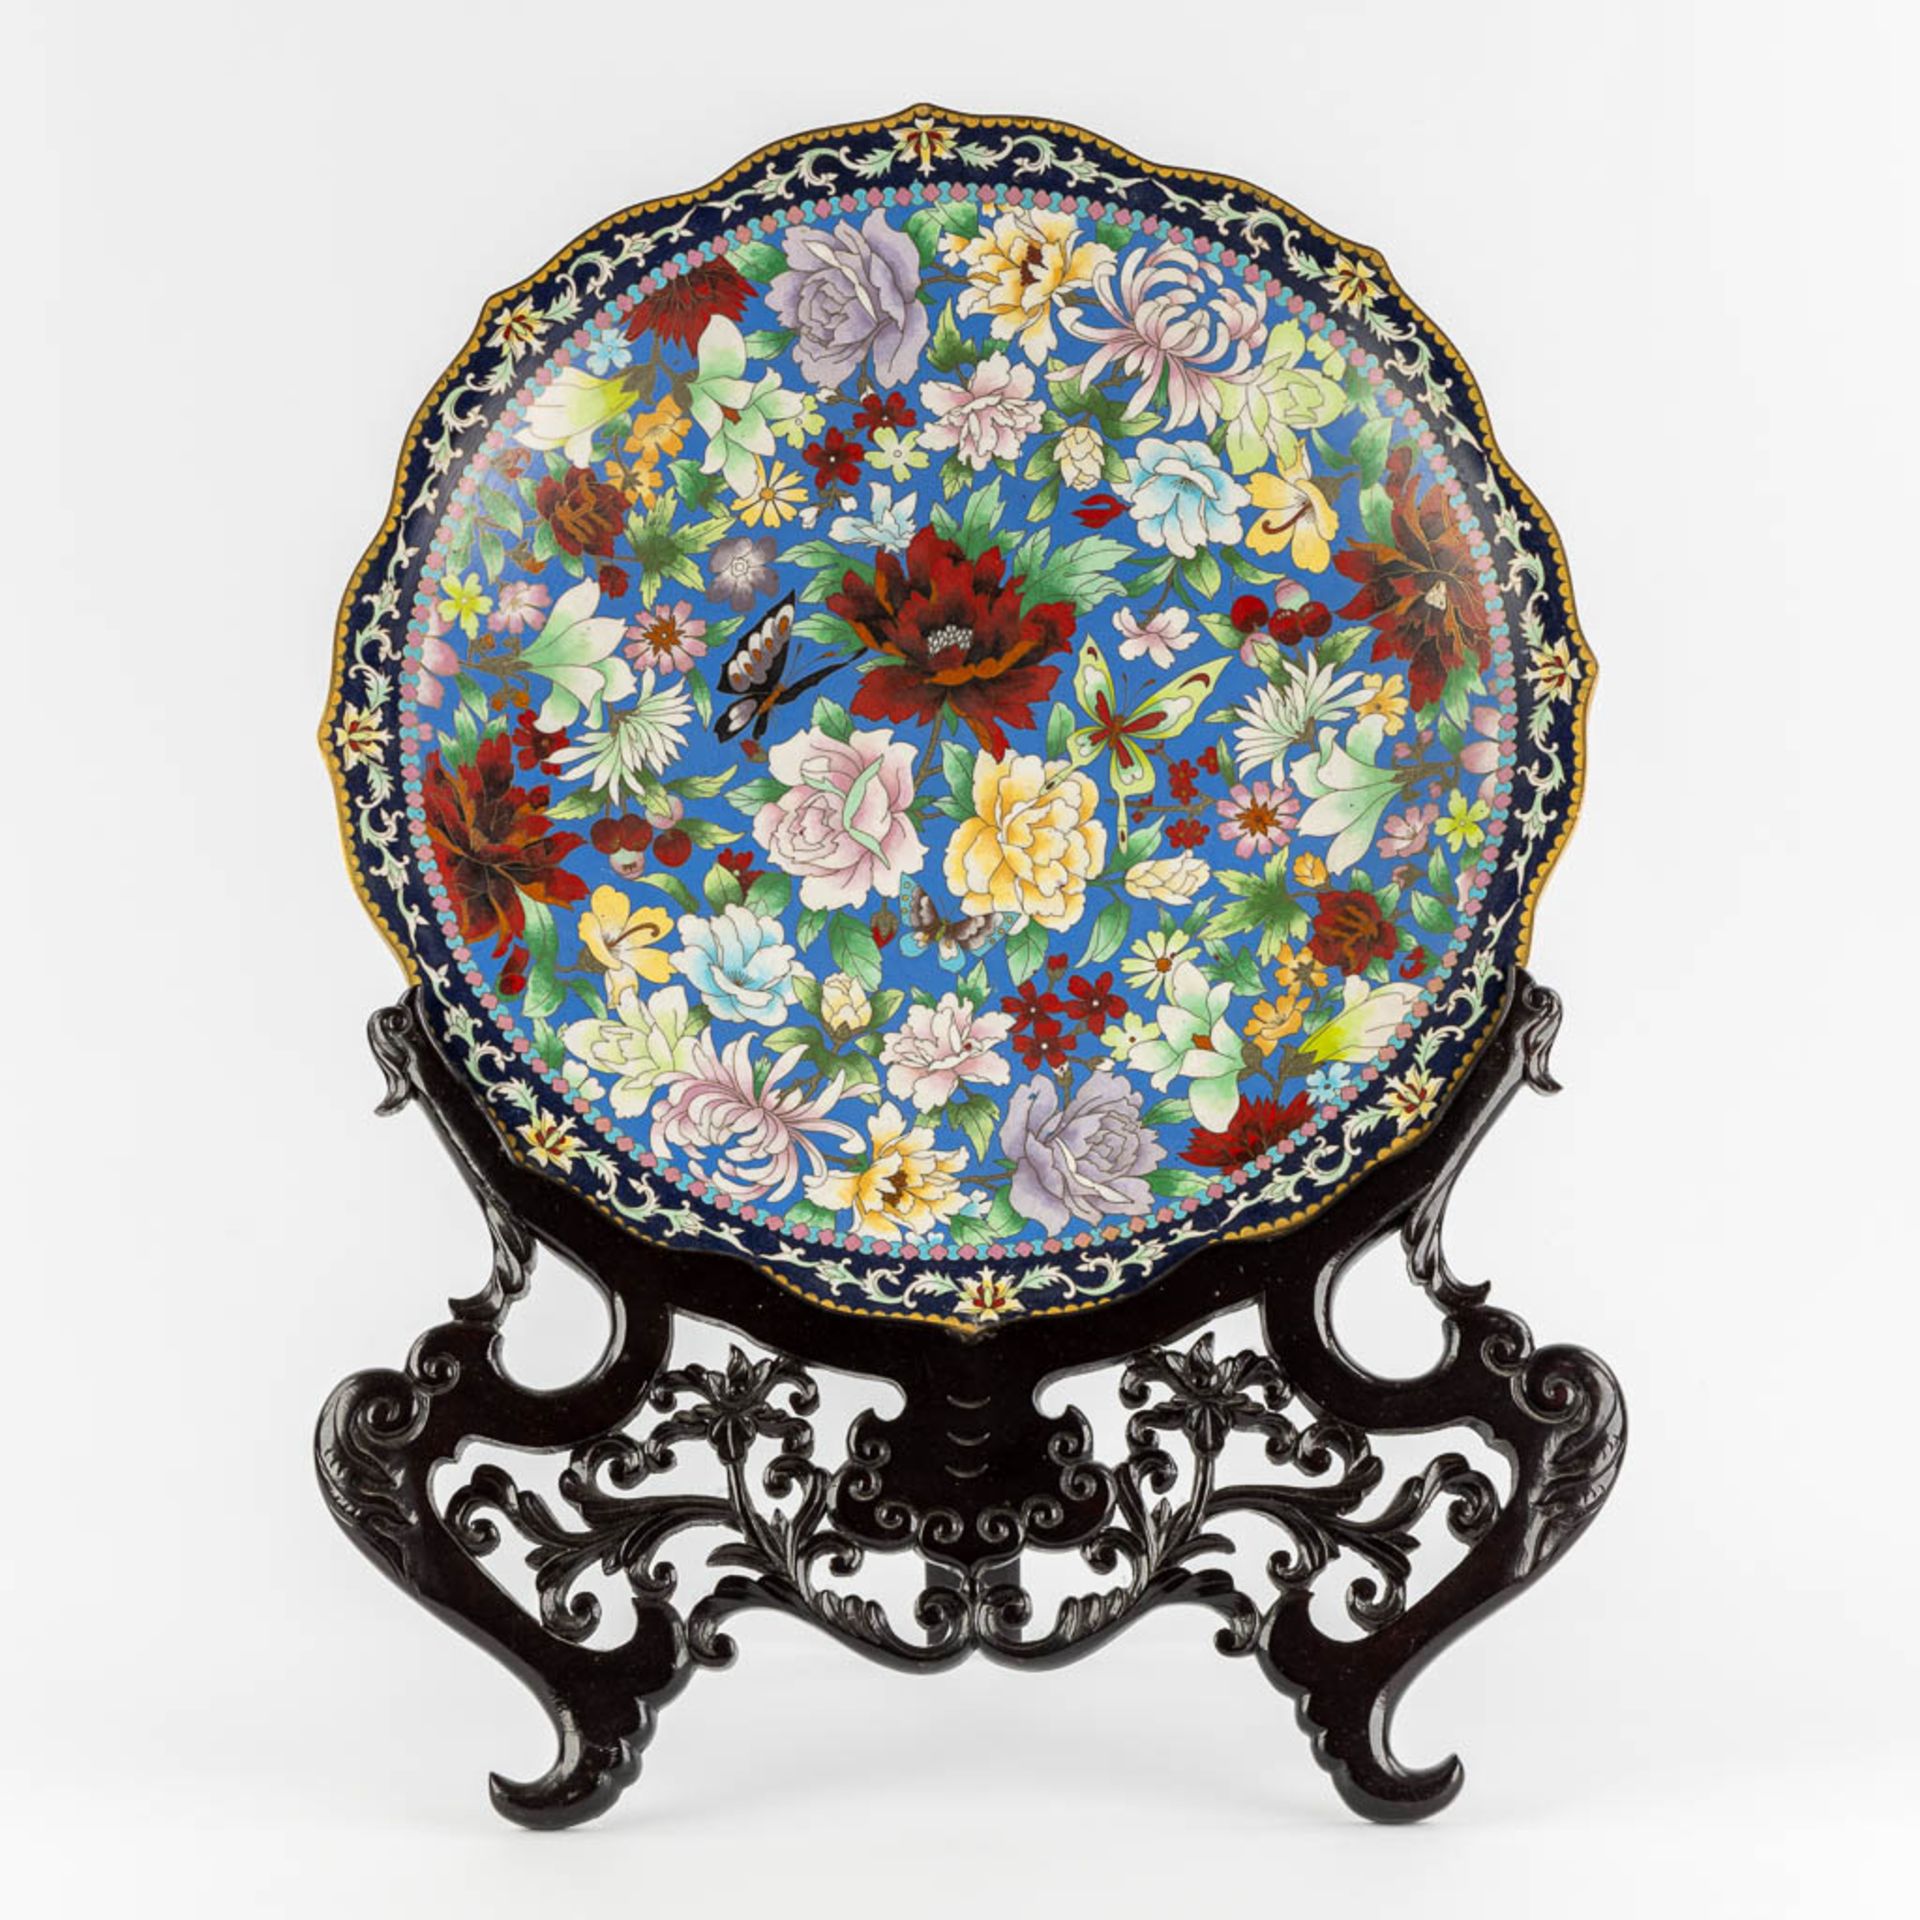 A large Chinese Cloisonné plate in an openworked sculptured wood stand. (W:51 x H:67 cm)